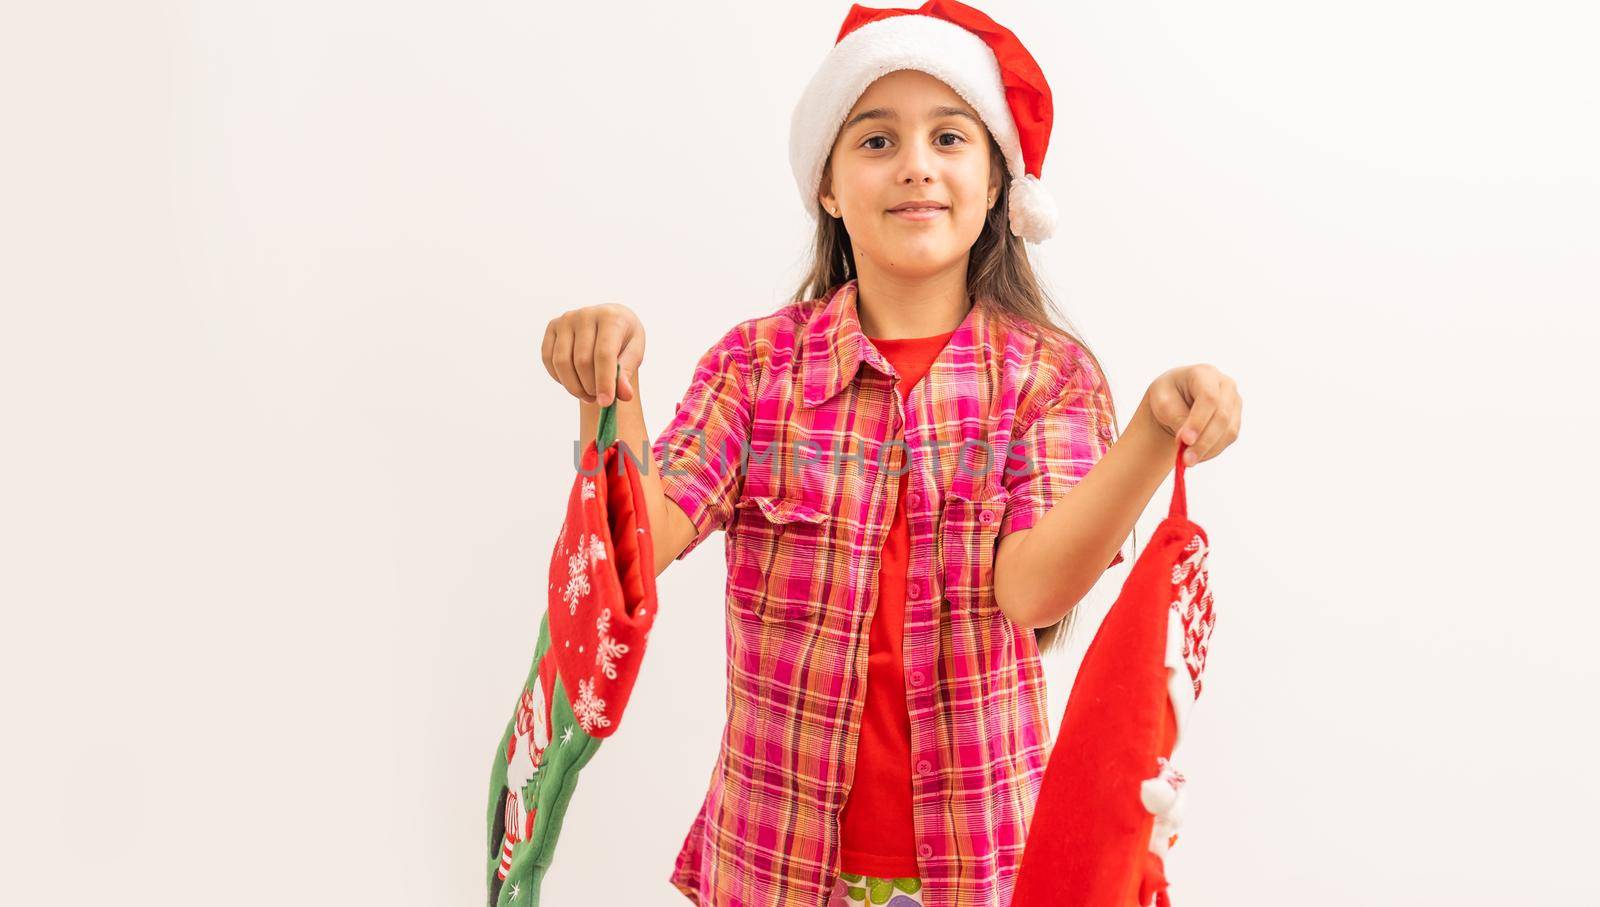 Cute smiling toddler girl in a red dress checking her Christmas stocking.